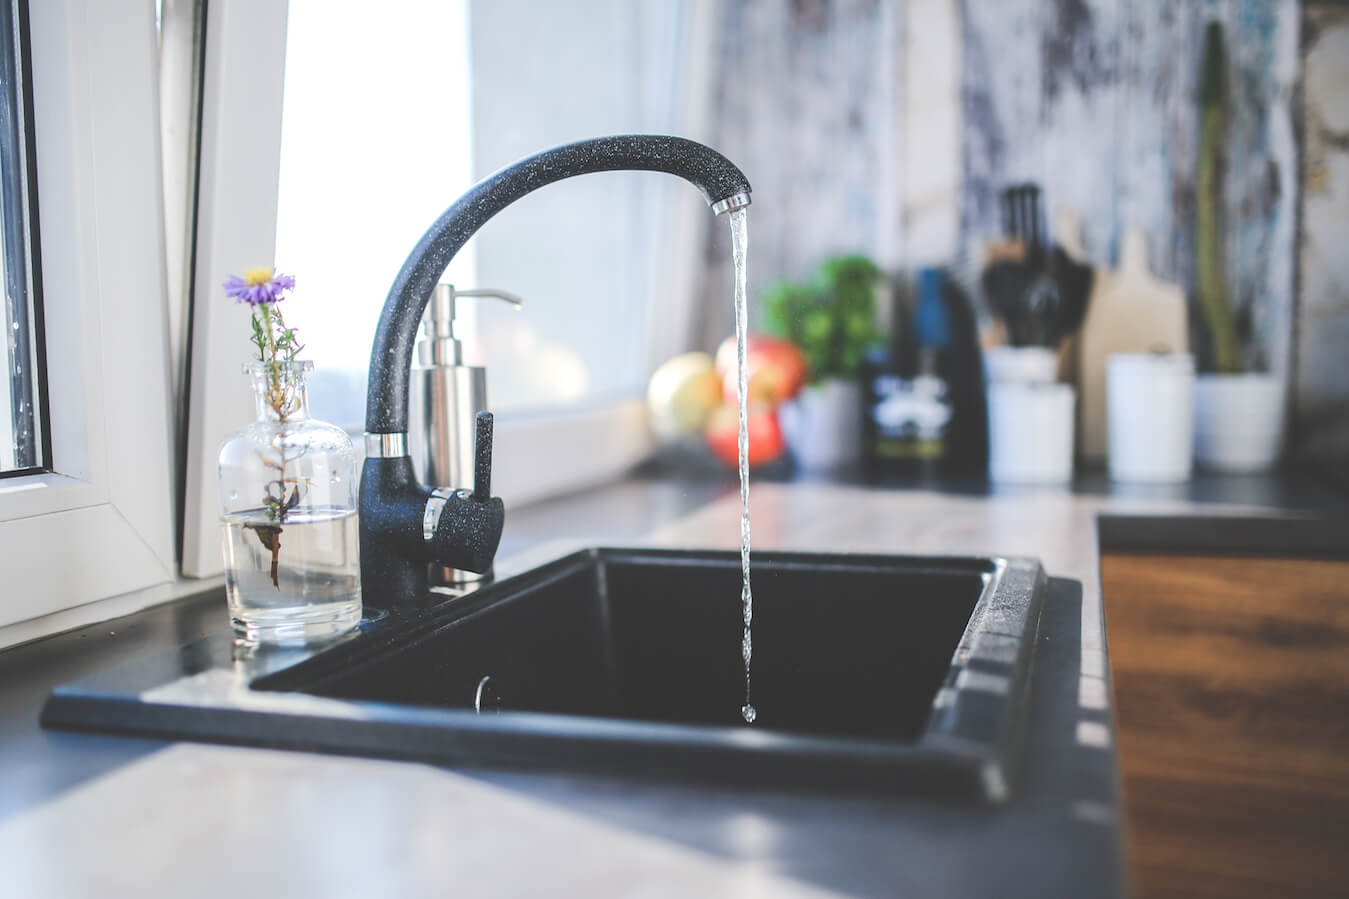 5 Simple Steps to Replace a Kitchen Sink Without Stress